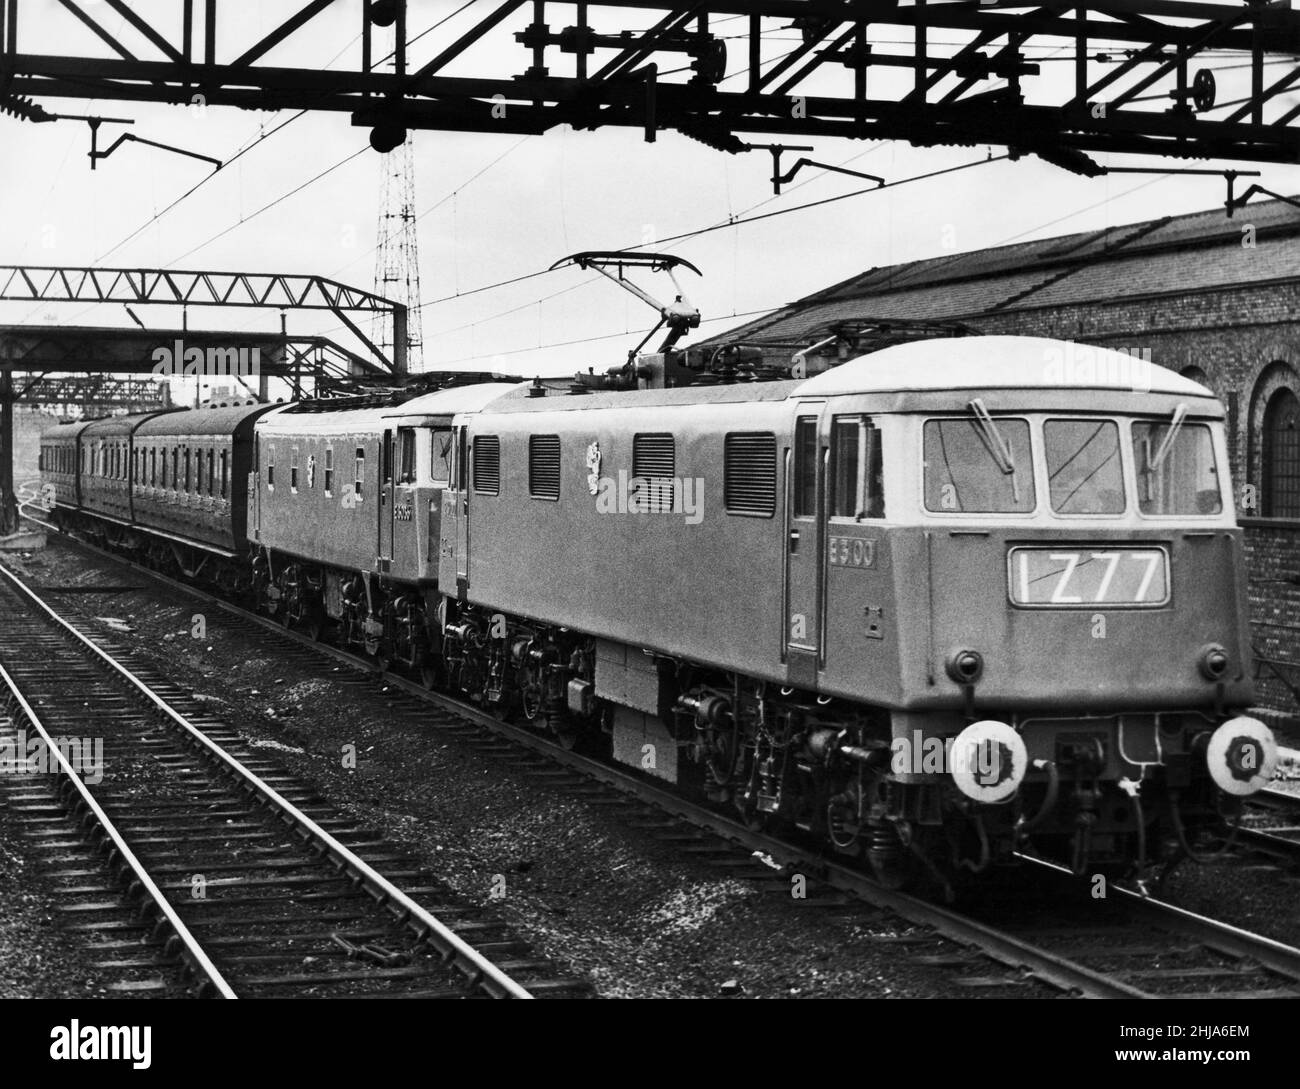 A British Rail Class 83 express locomotive electric  train, built by English Electric at Vulcan Foundry, Newton-le-Willows  for the newly electrified West Coast Main Line between Birmingham and the North West,  Here its is pictured in motion on the 1Z77 service.. 8th October 1962. Stock Photo